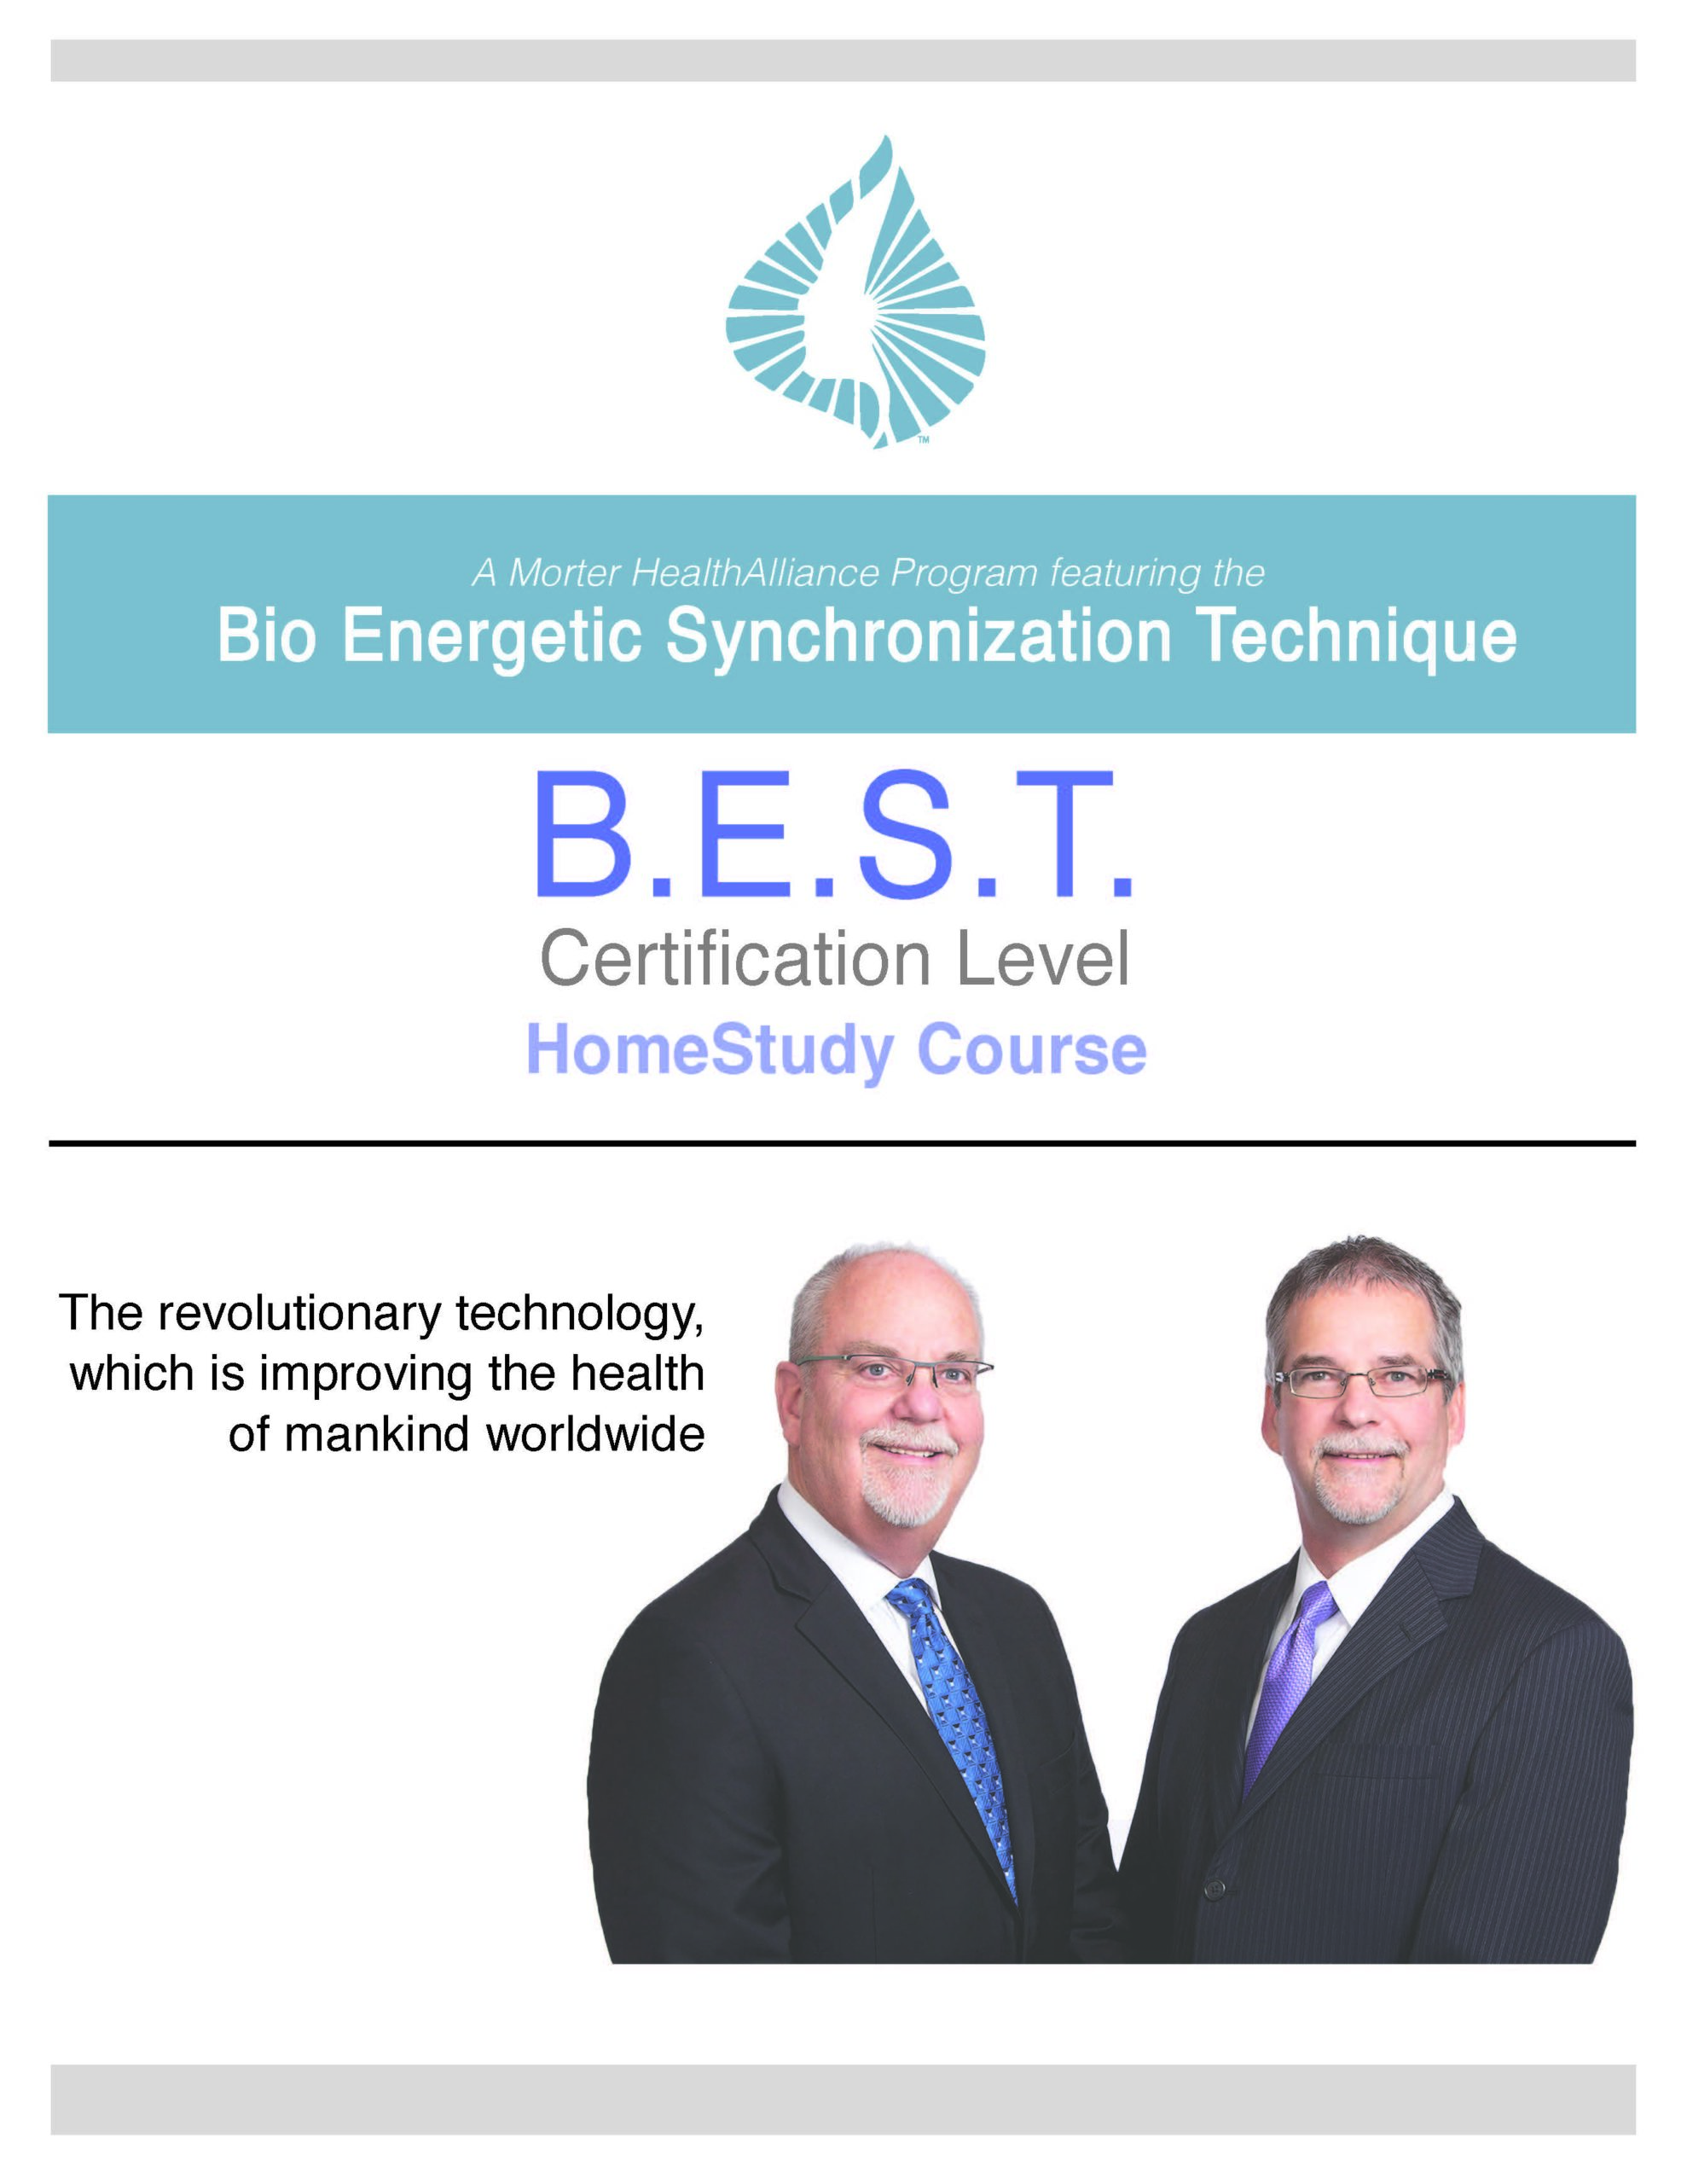 Professional B.E.S.T. Certification Level Homestudy Course